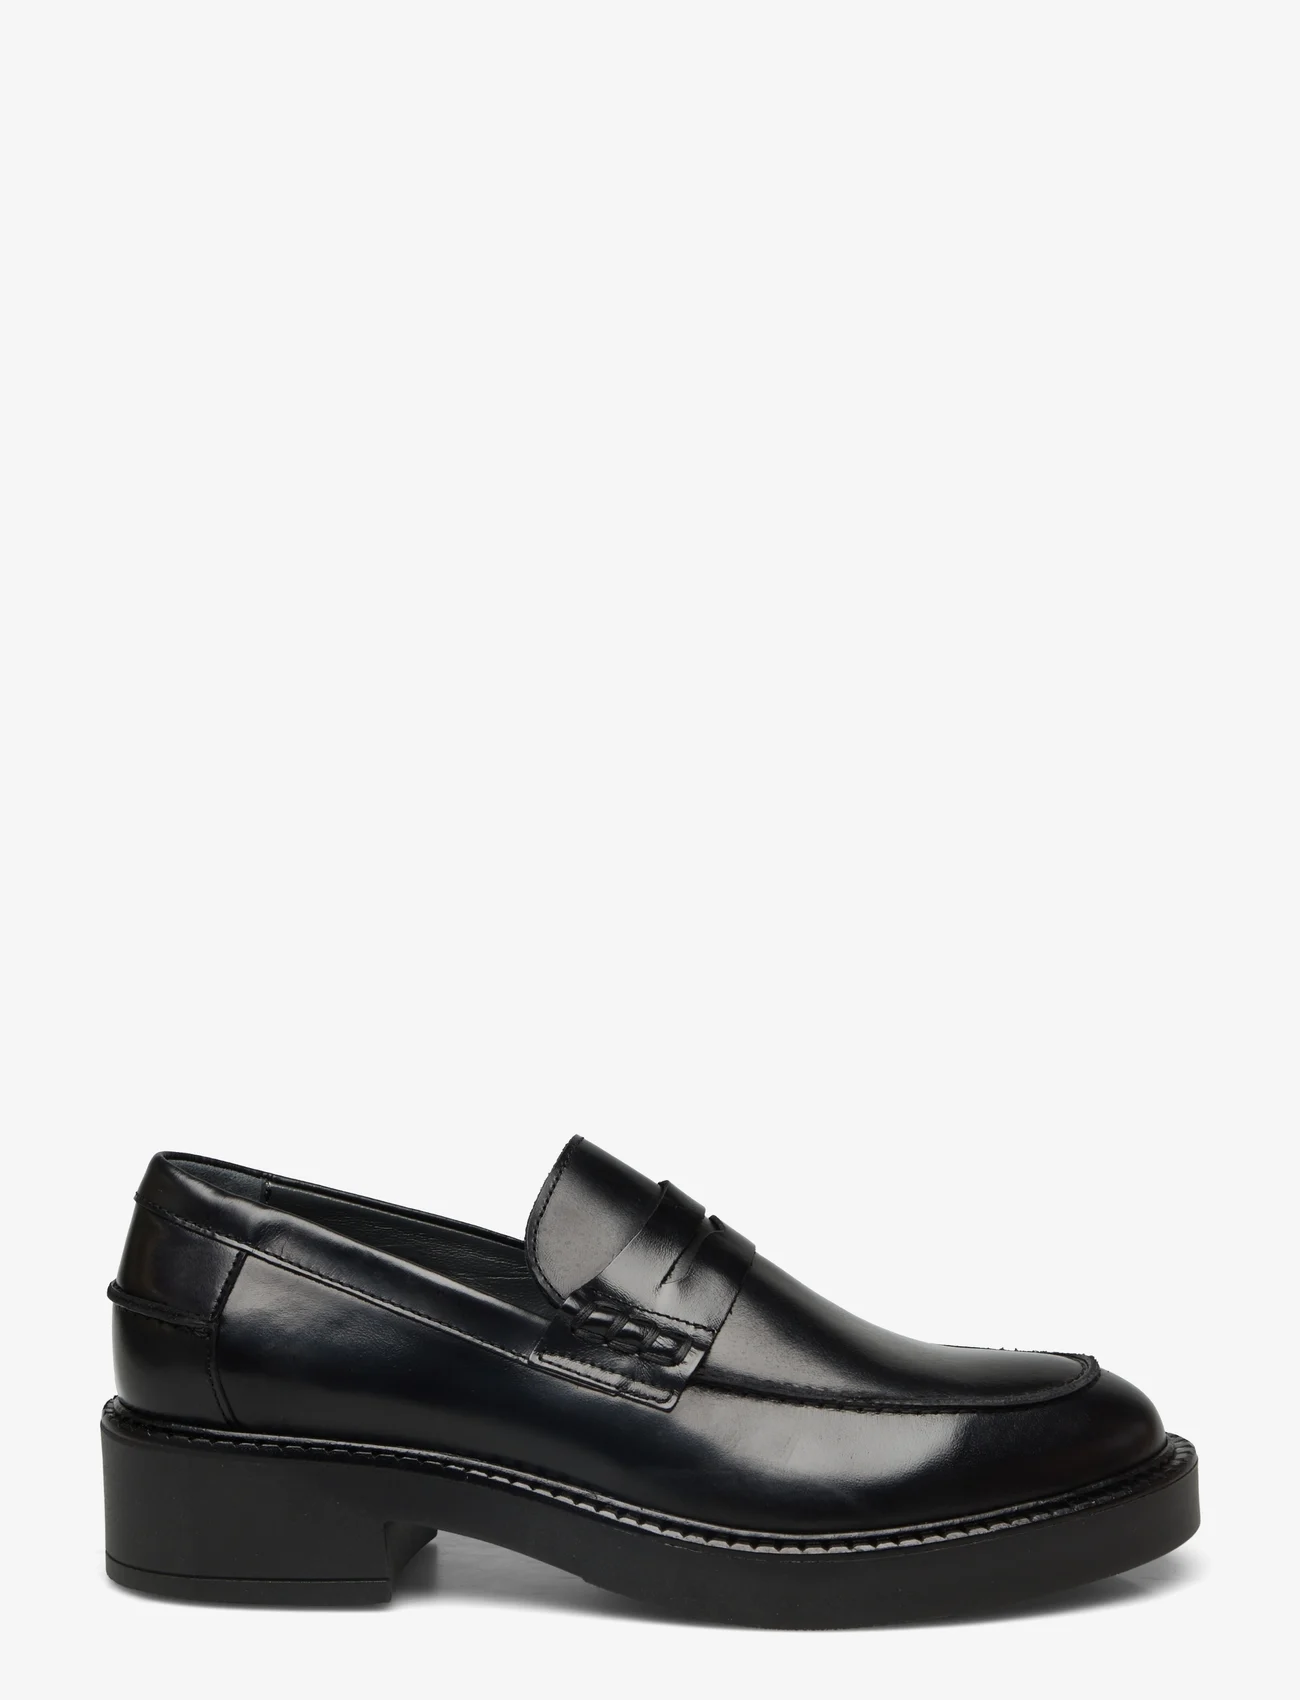 ANGULUS - Loafer - birthday gifts - 1848 e black - 1